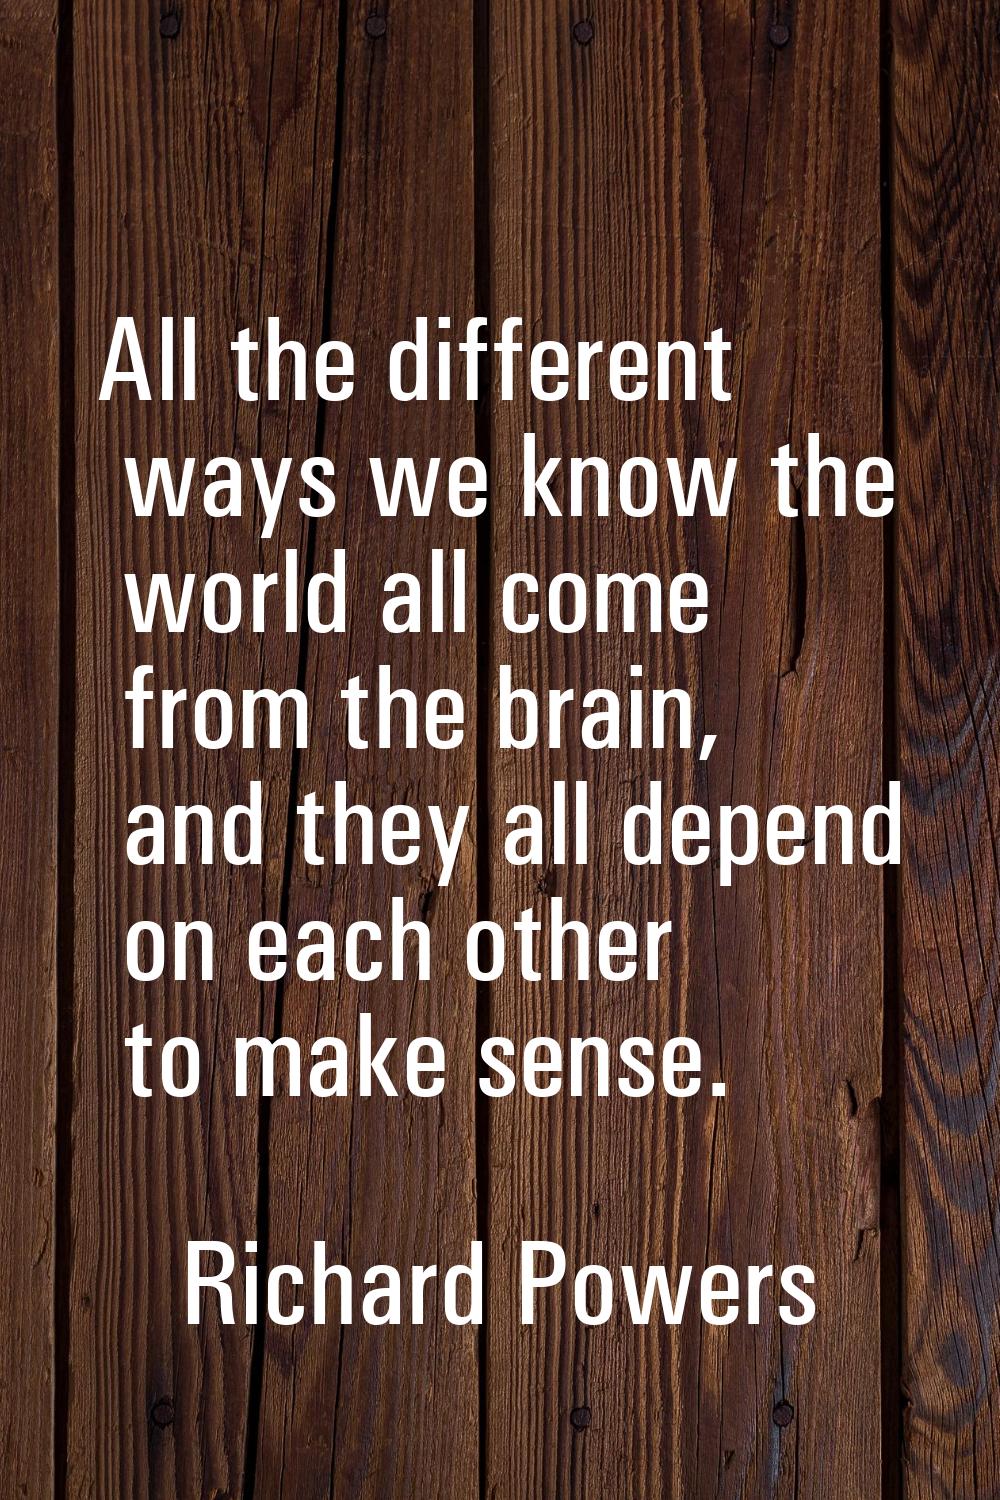 All the different ways we know the world all come from the brain, and they all depend on each other